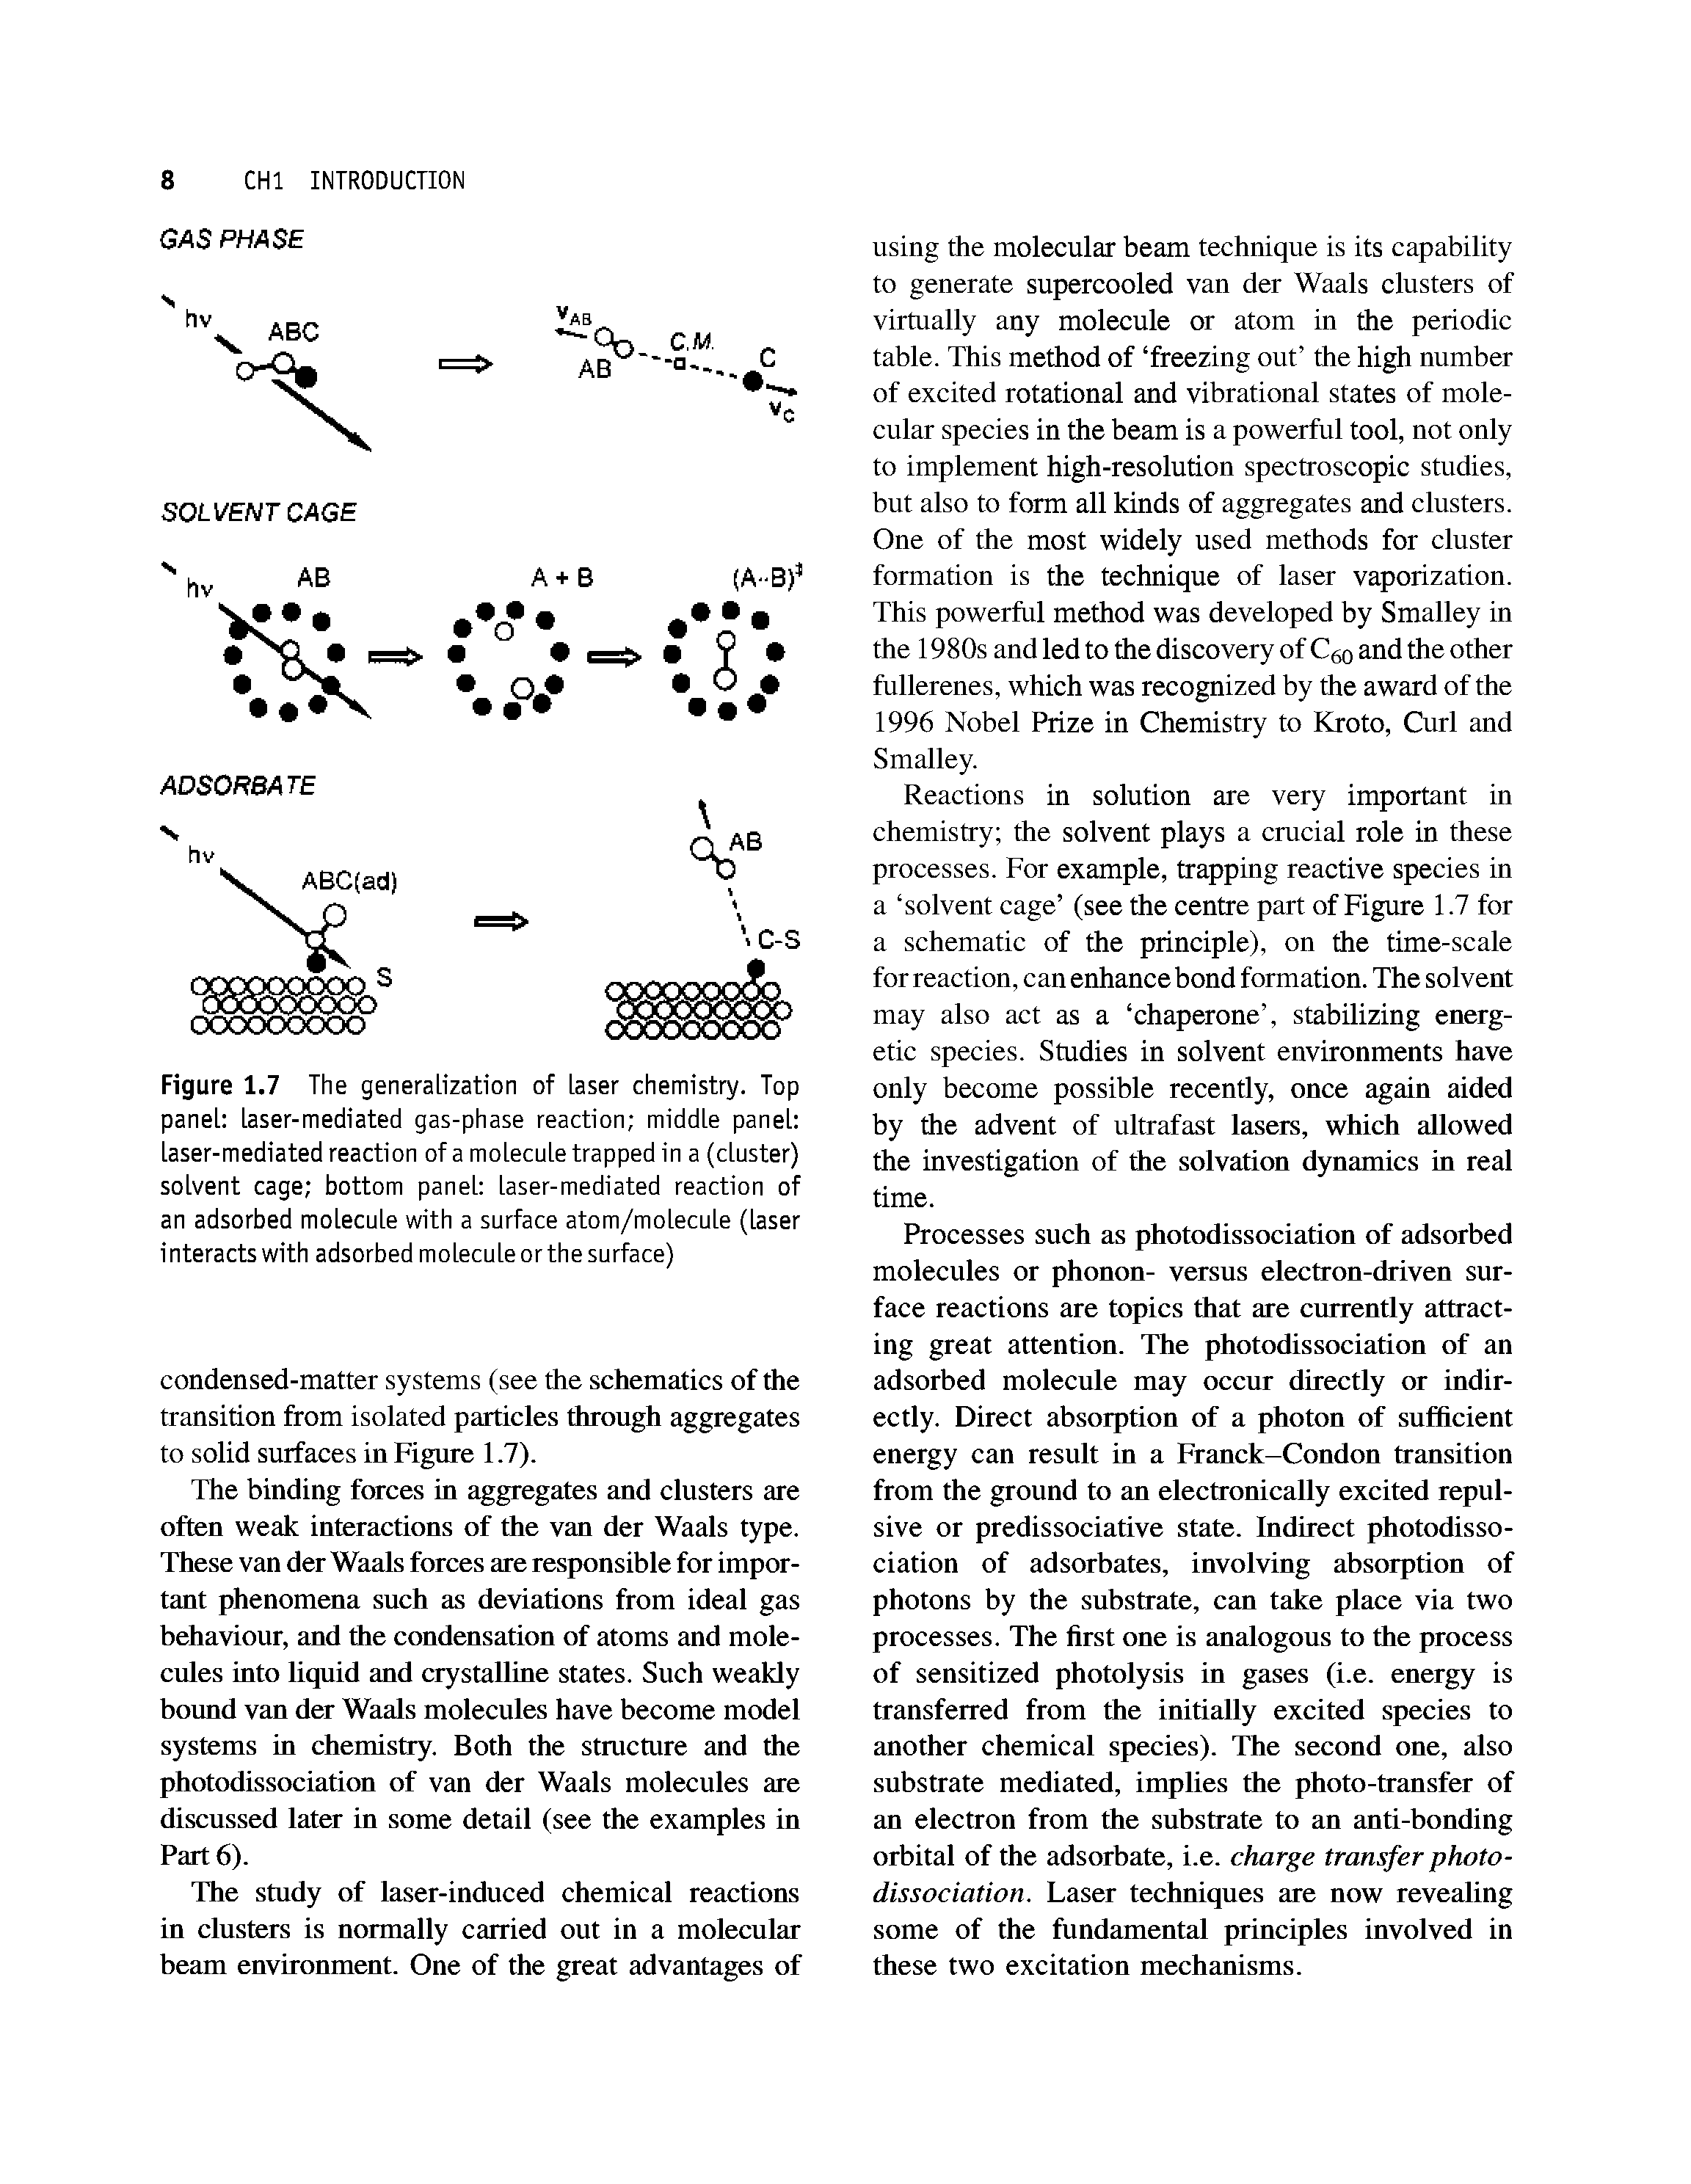 Figure 1.7 The generalization of laser chemistry. Top panel laser-mediated gas-phase reaction middle panel laser-mediated reaction of a molecule trapped in a (cluster) solvent cage bottom panel laser-mediated reaction of an adsorbed molecule with a surface atom/molecule (laser interacts with adsorbed molecule or the surface)...